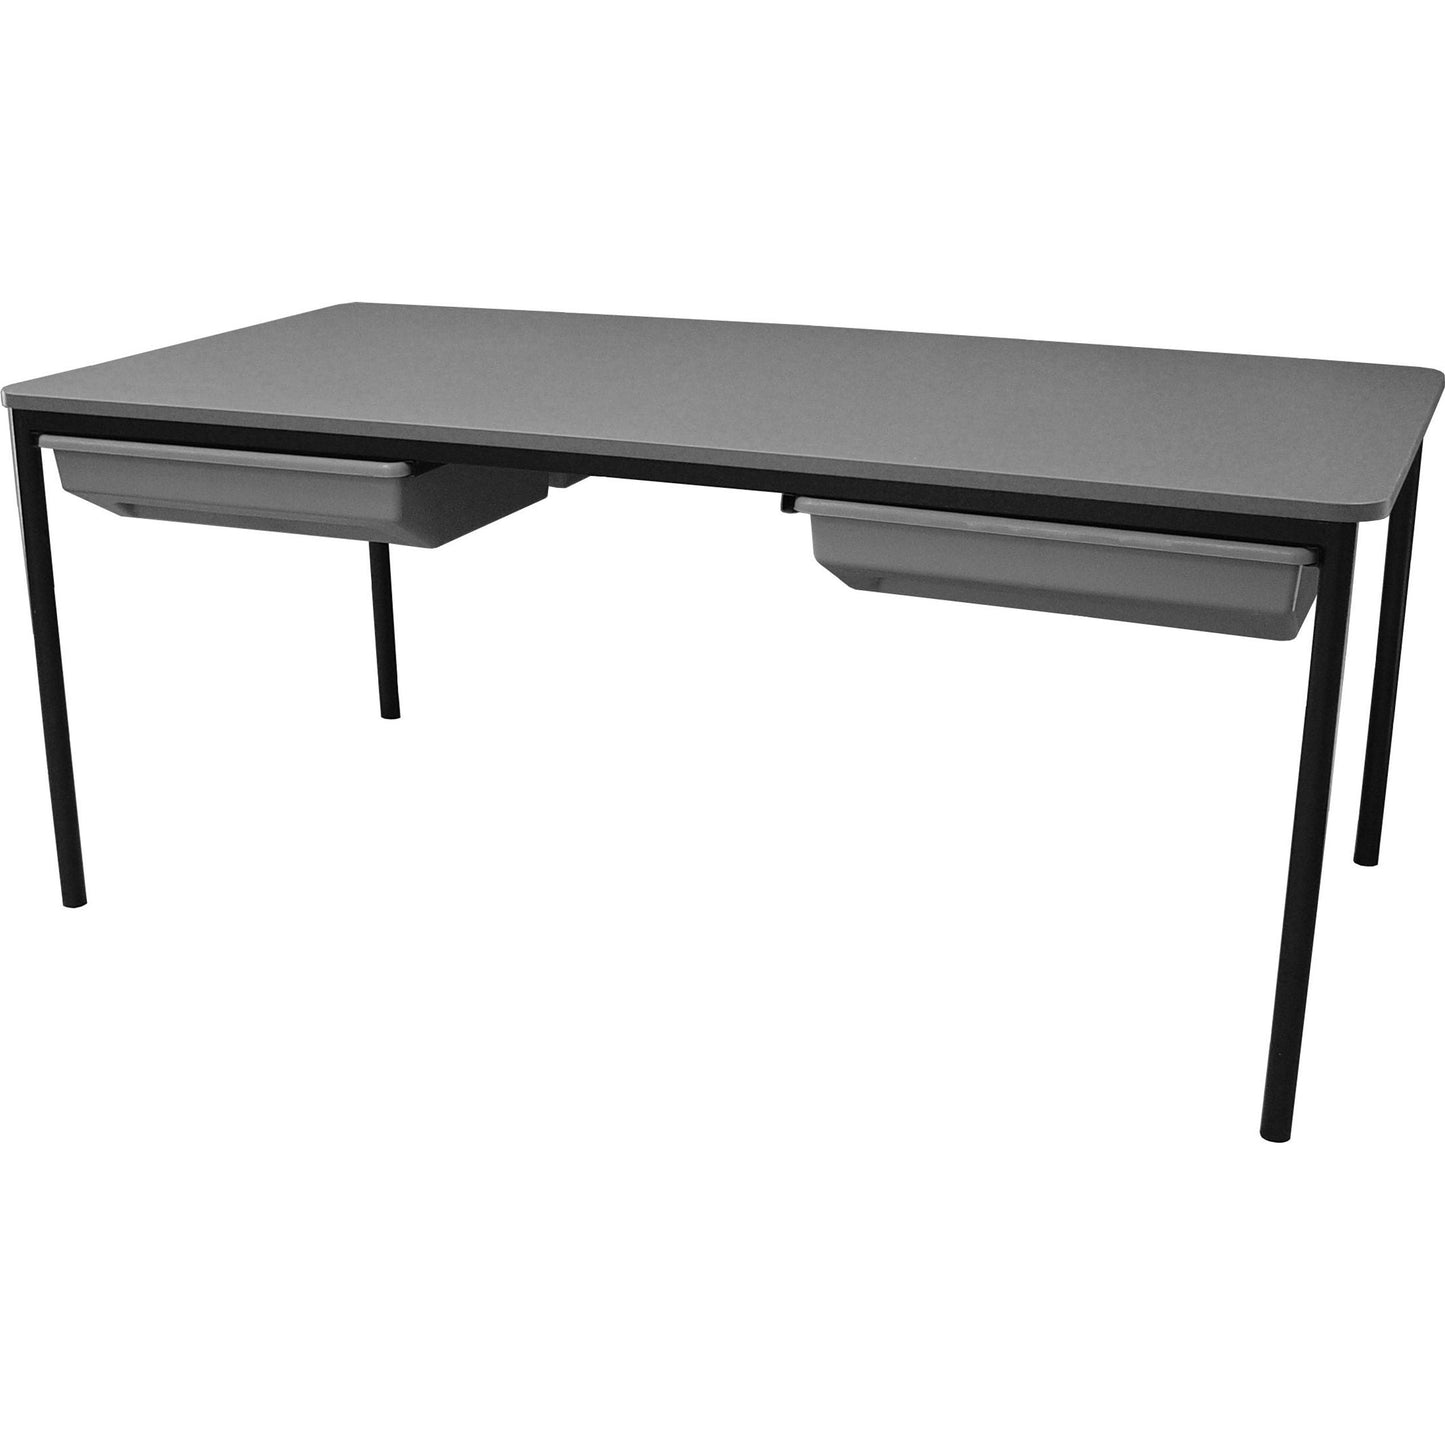 Deluxe Table 1200 x 800 w/4 x Totes